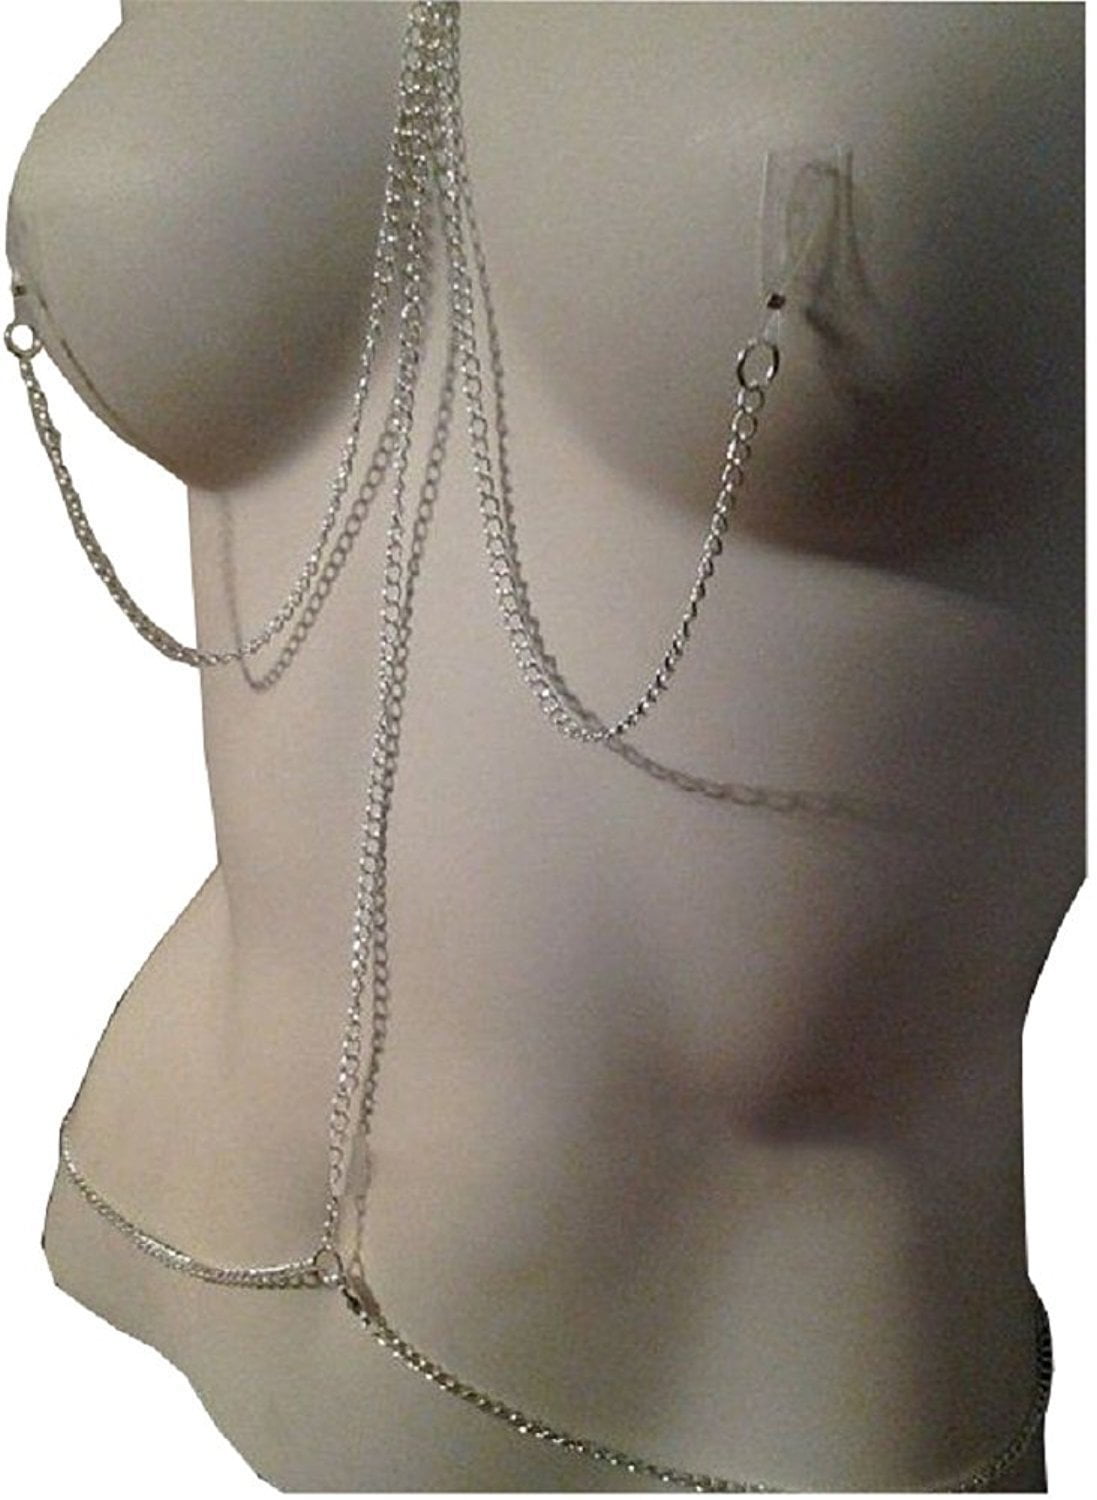 devesh amin recommends Nipple Piercing Chain